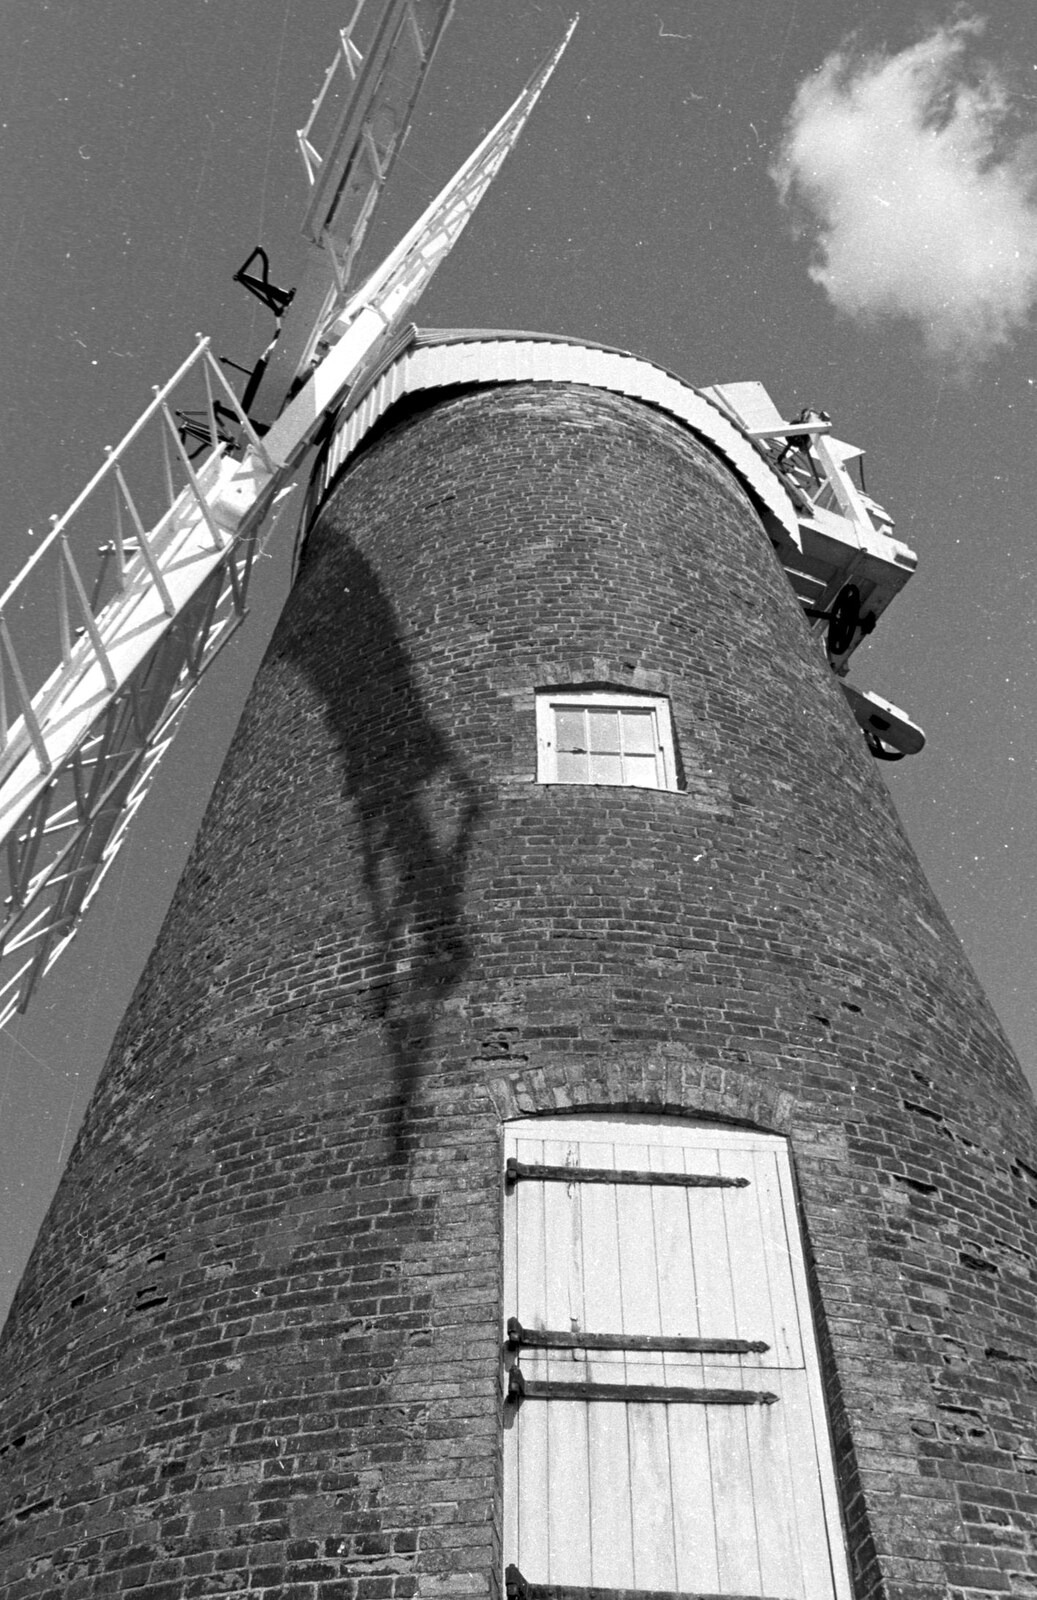 A Black and White Life in Concrete, Stuston, Suffolk - 3rd September 1992: A fluffy cloud